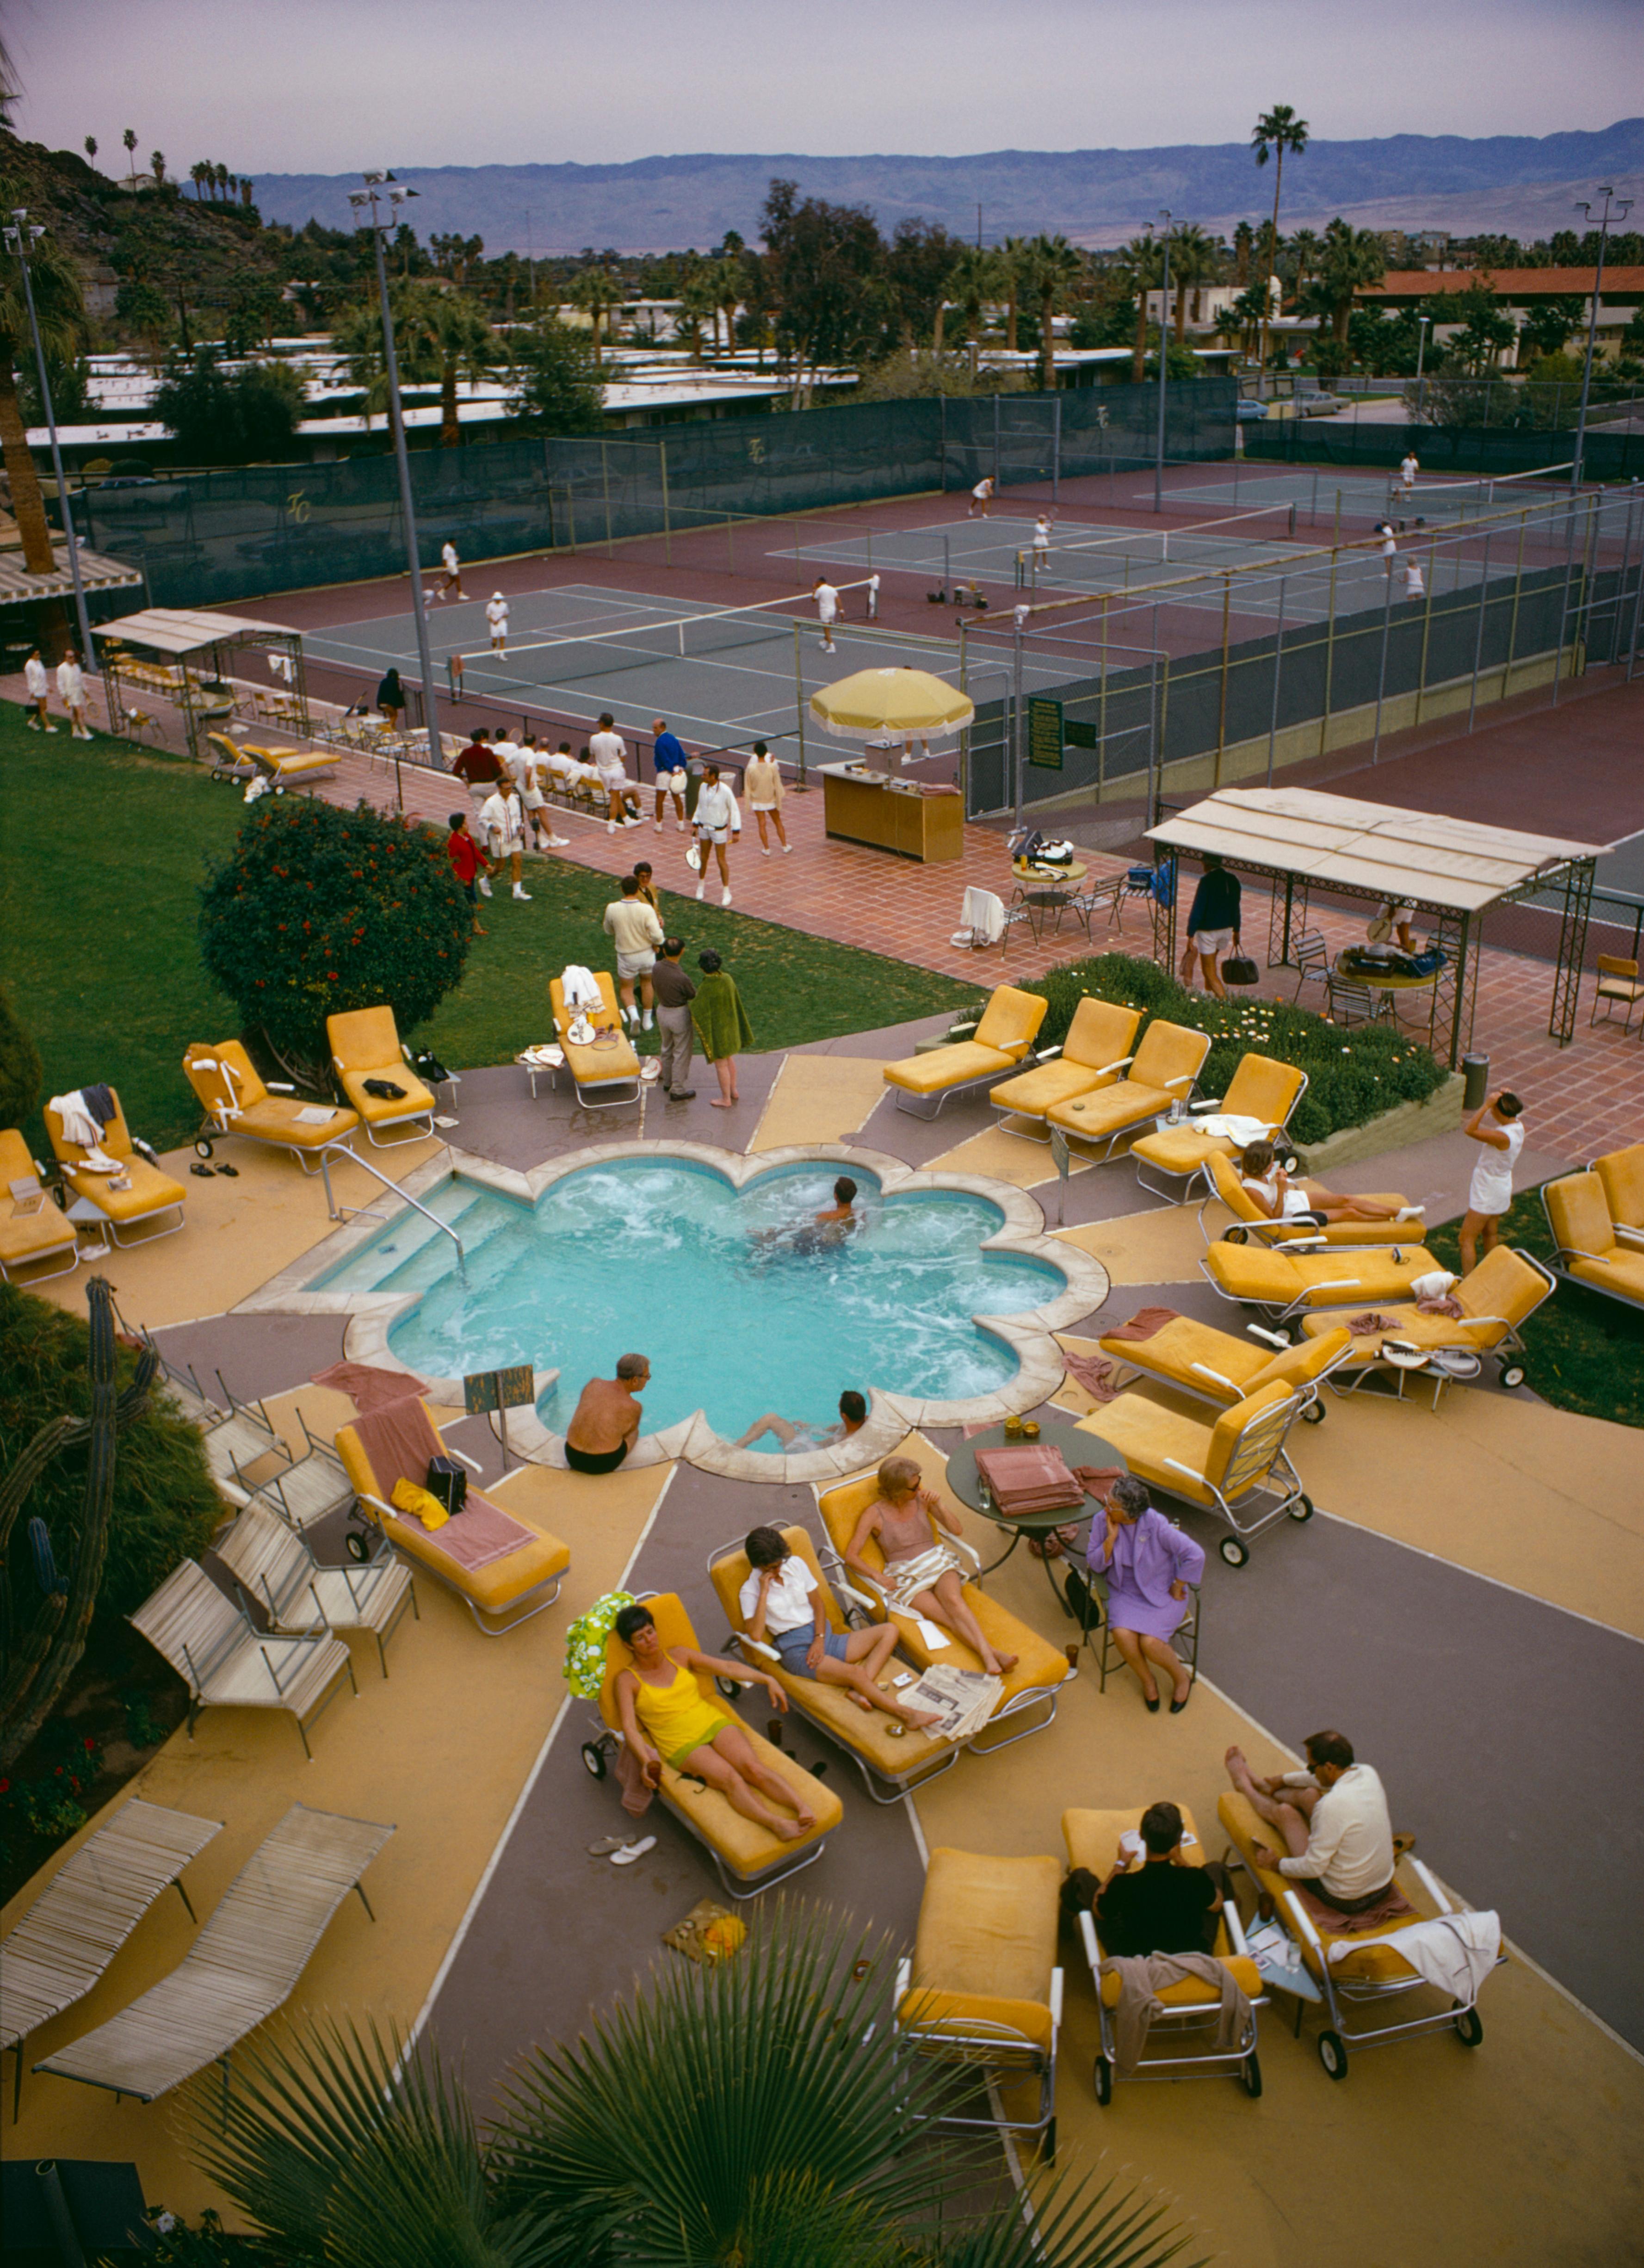 'Relaxing At The Club' 1970 Slim Aarons Limited Estate Edition Print 

Members sunbathe around the pool at Palm Springs Tennis Club, California, circa 1970.

Produced from the original transparency
Certificate of authenticity supplied 
Archive